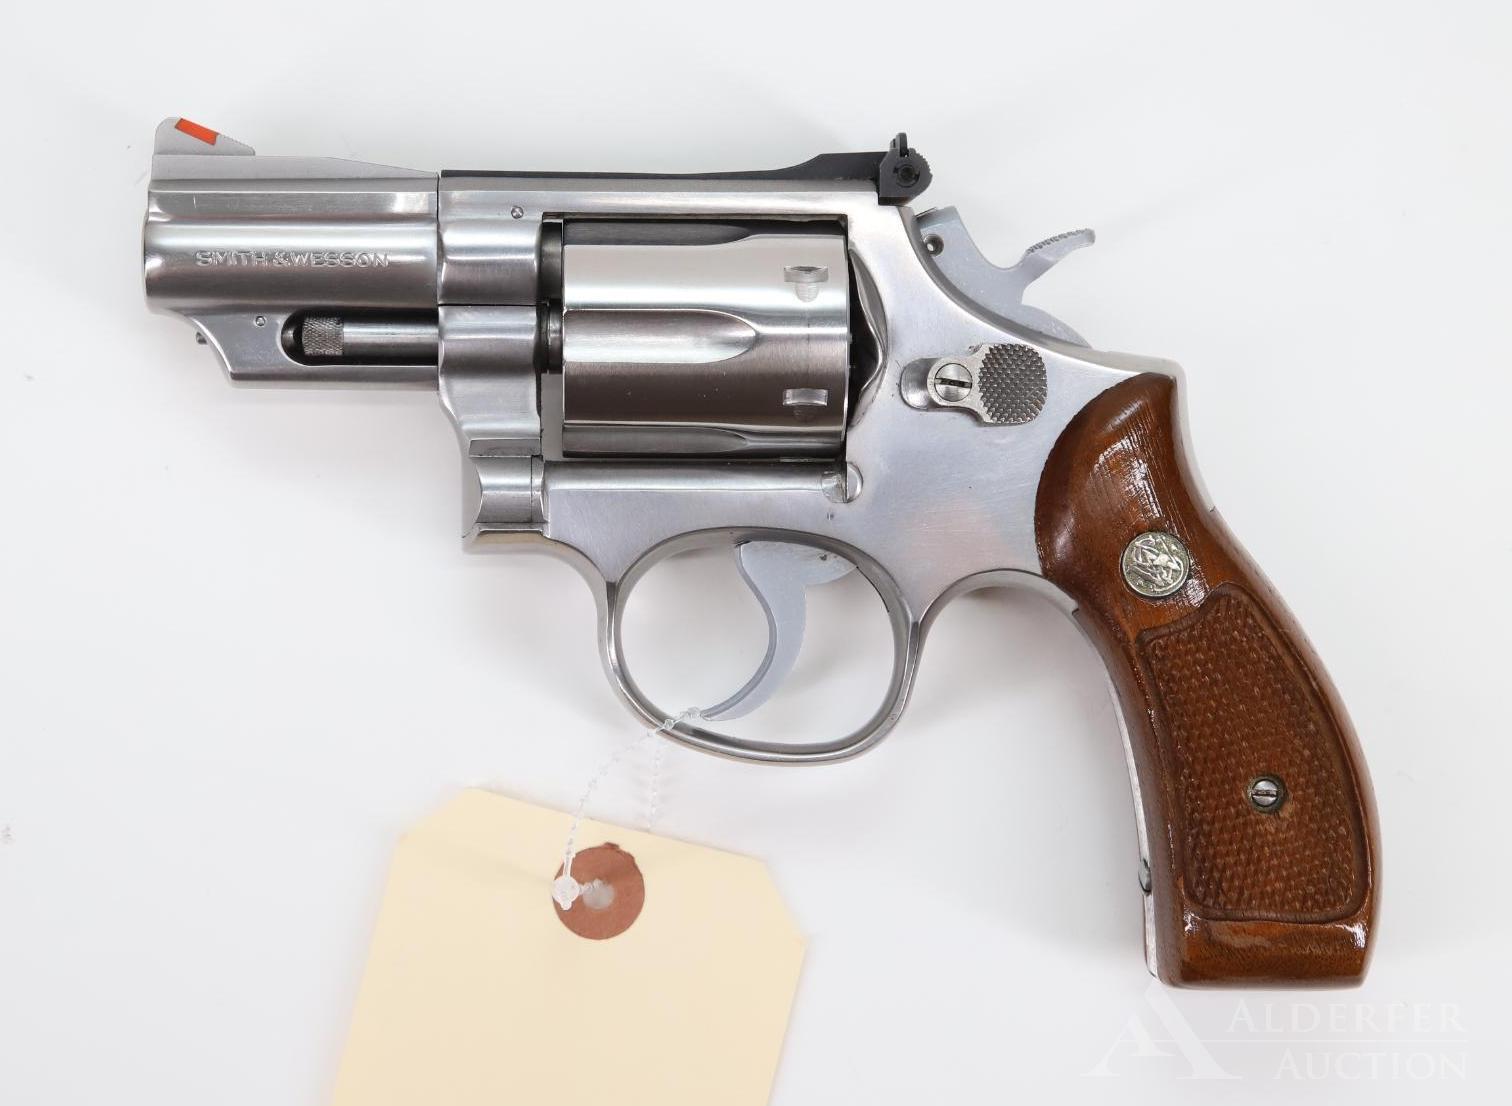 Smith & Wesson 66-1 Double Action Revolver